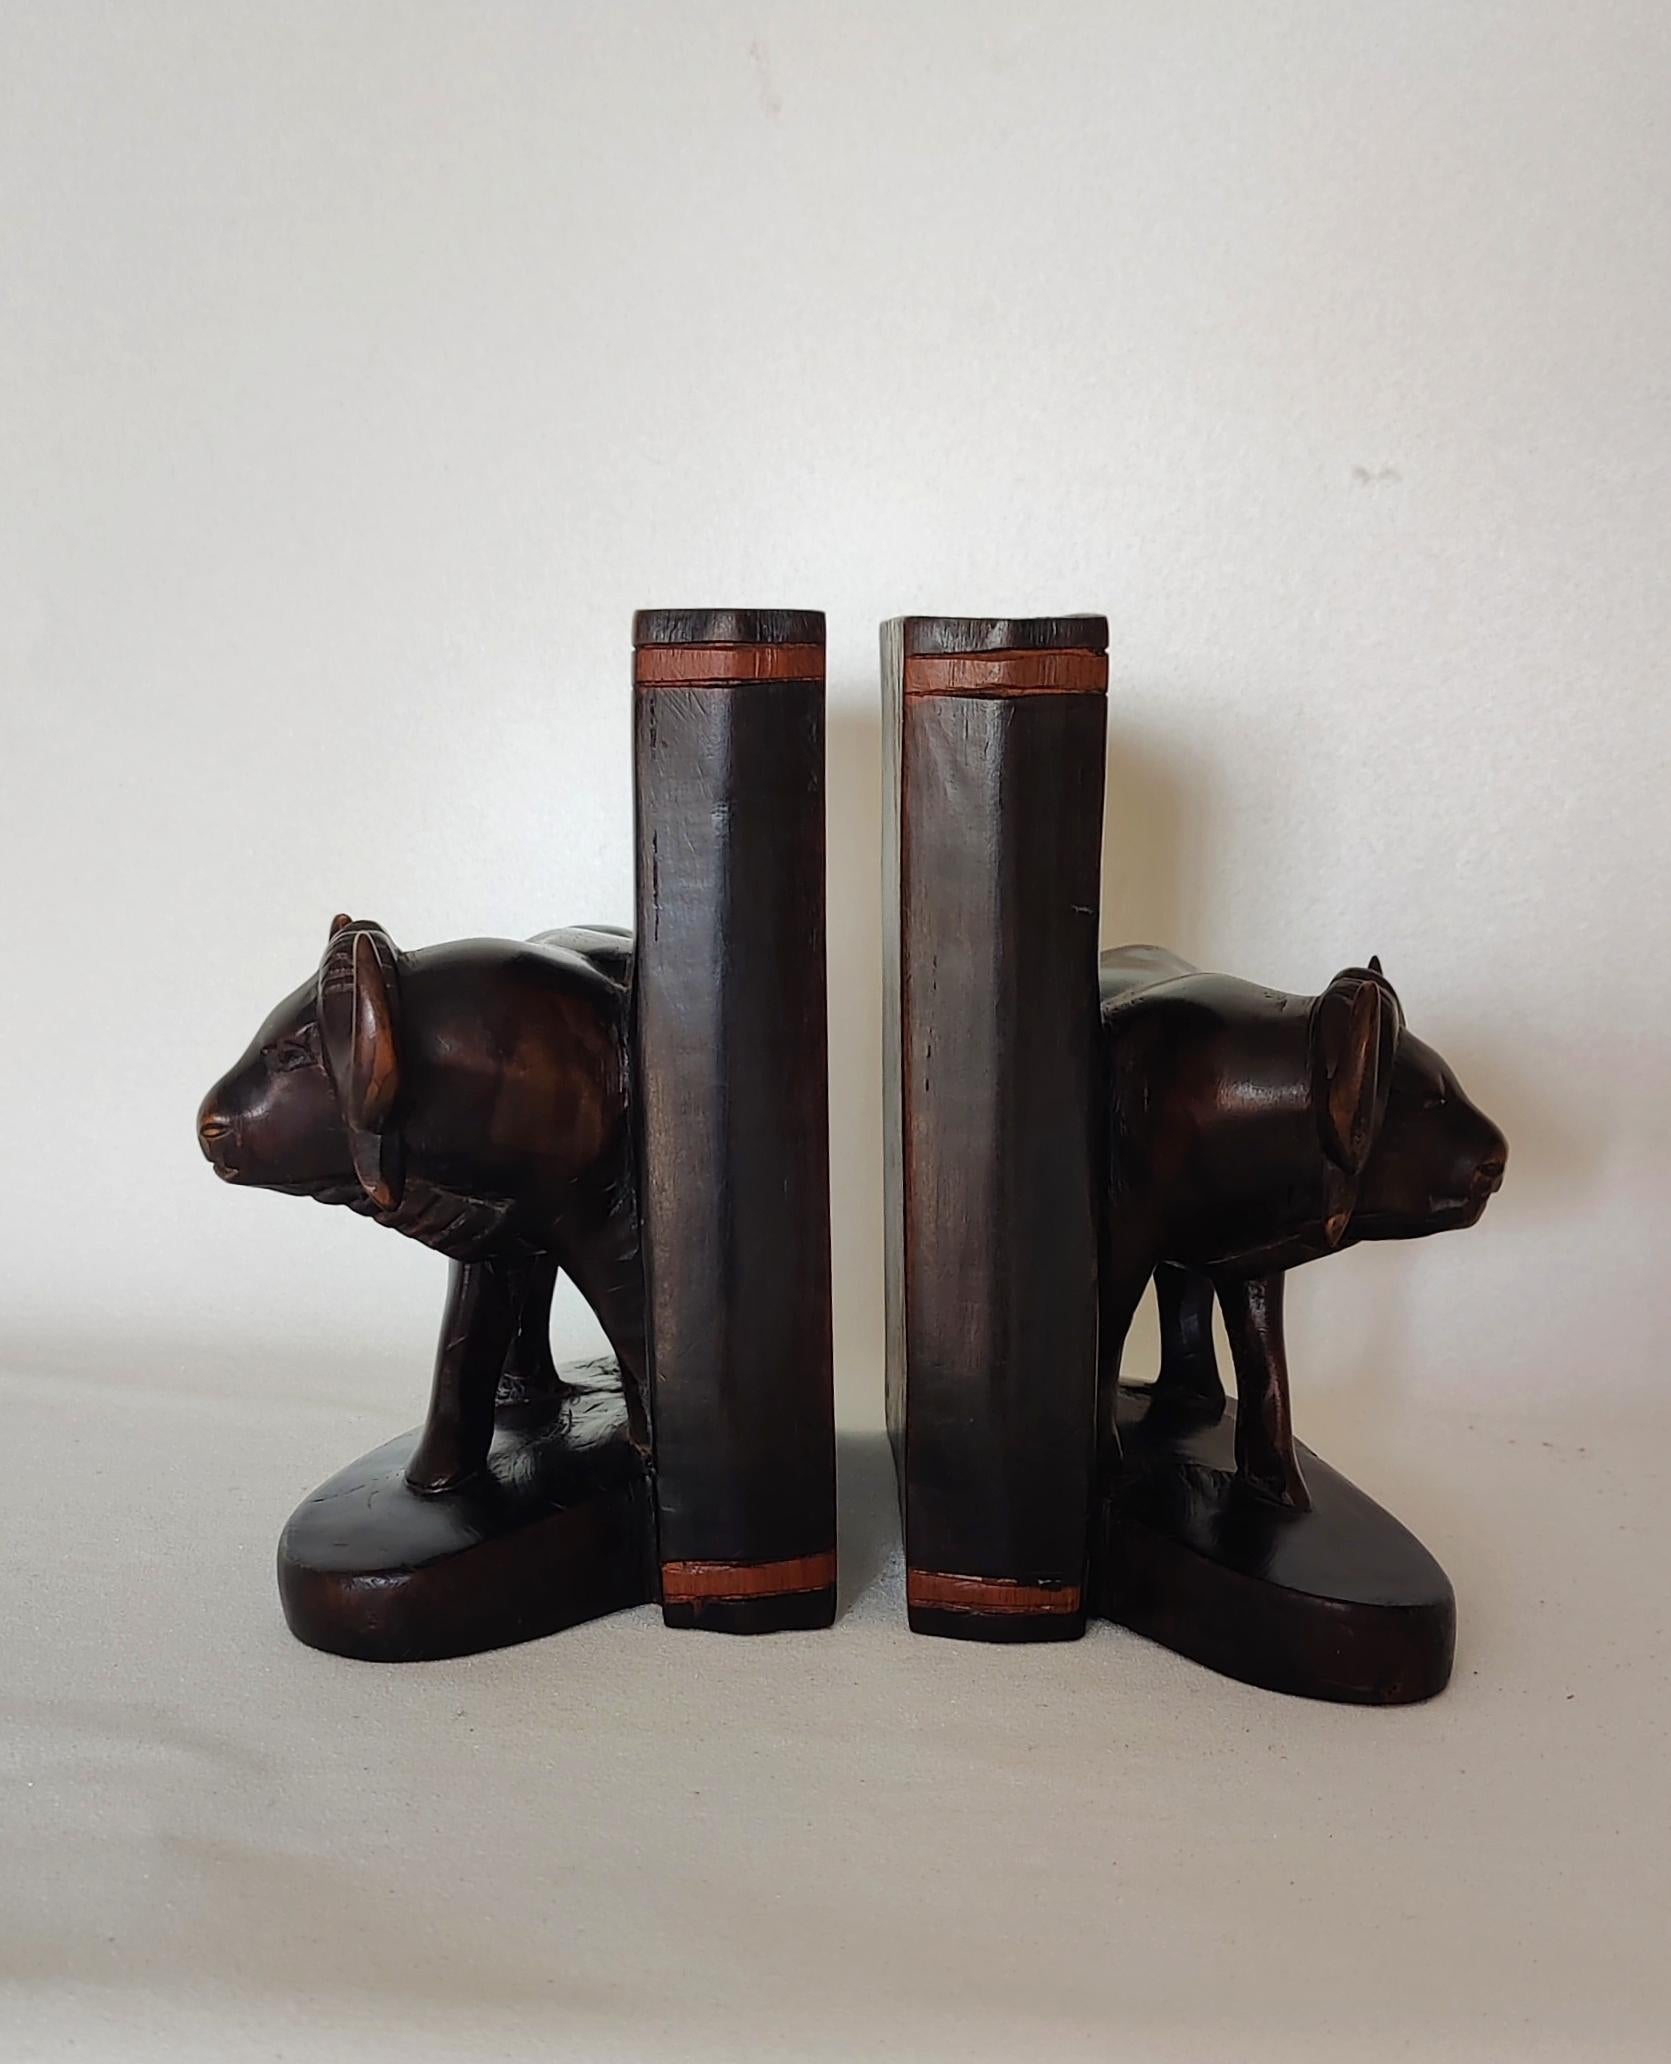 Tropical Wood African Buffalo Bookends

Dimensions a piece (h x w x d): 18 x 17 x 11 cm